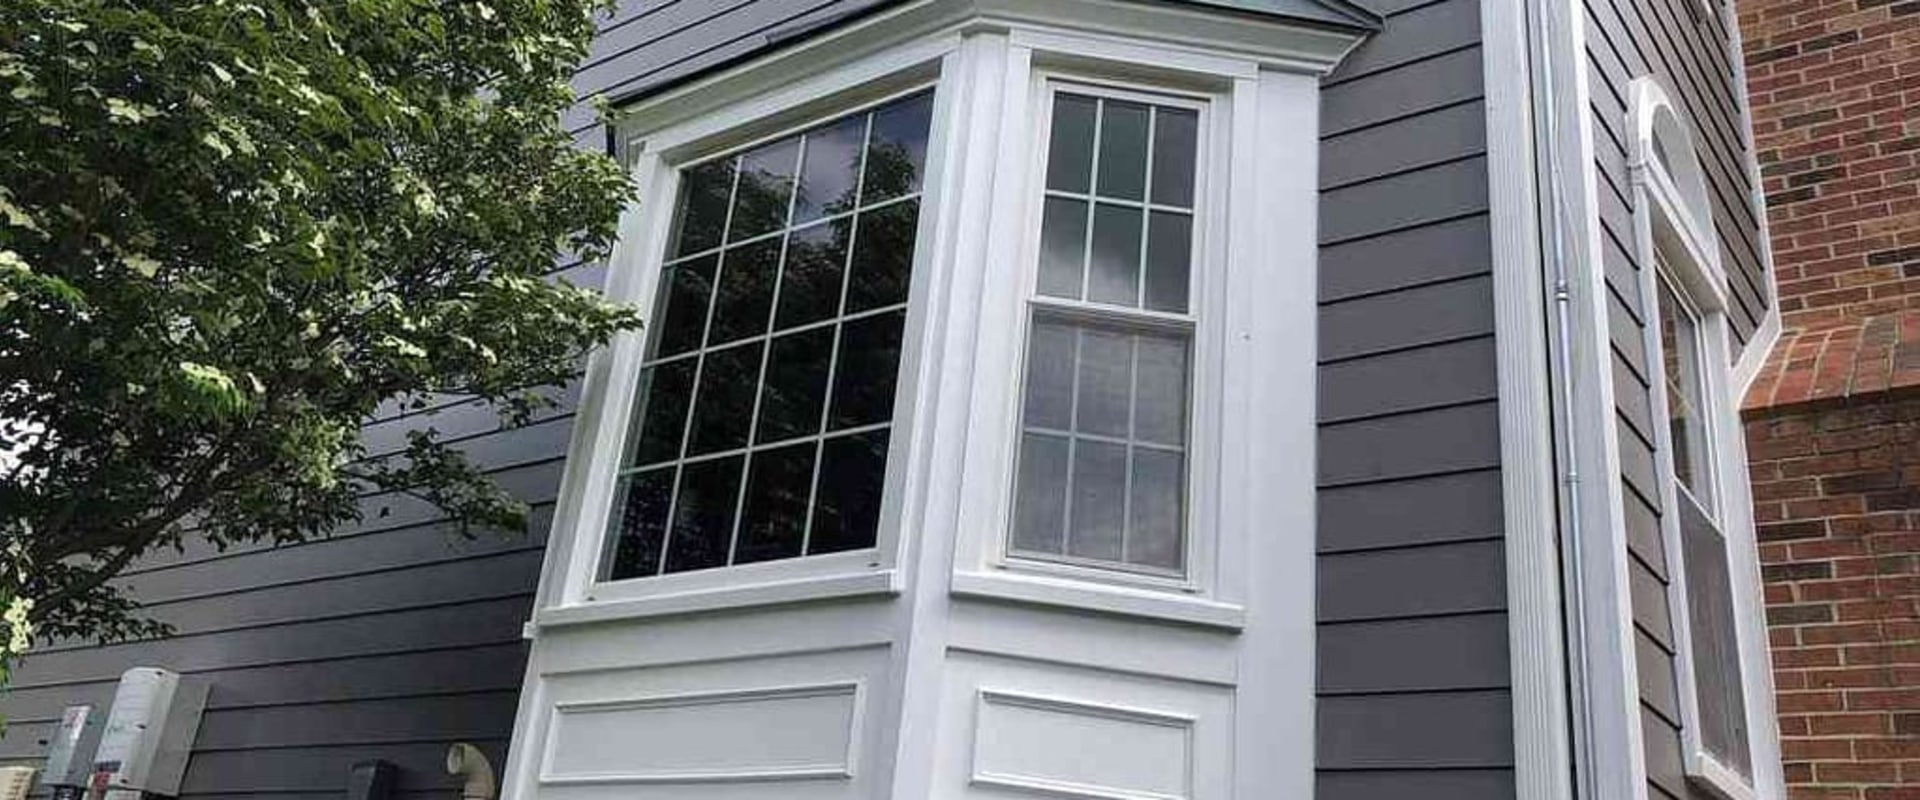 The Benefits Of Home Window And Roof Replacement In Columbia